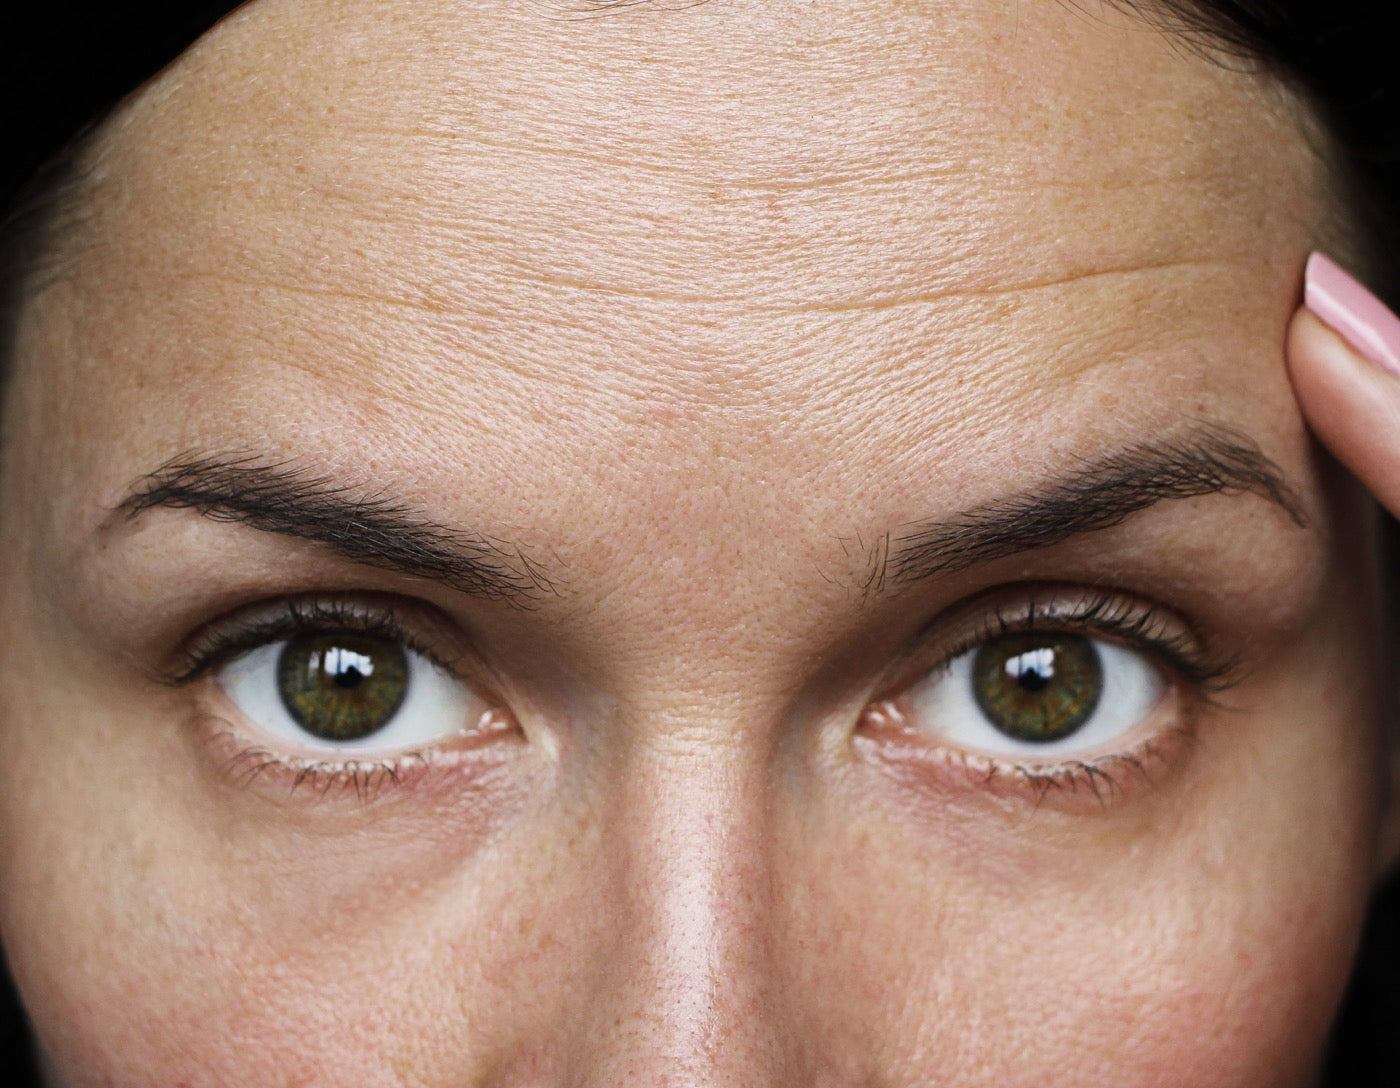 4 Things That Cause Wrinkles & How to Prevent Them